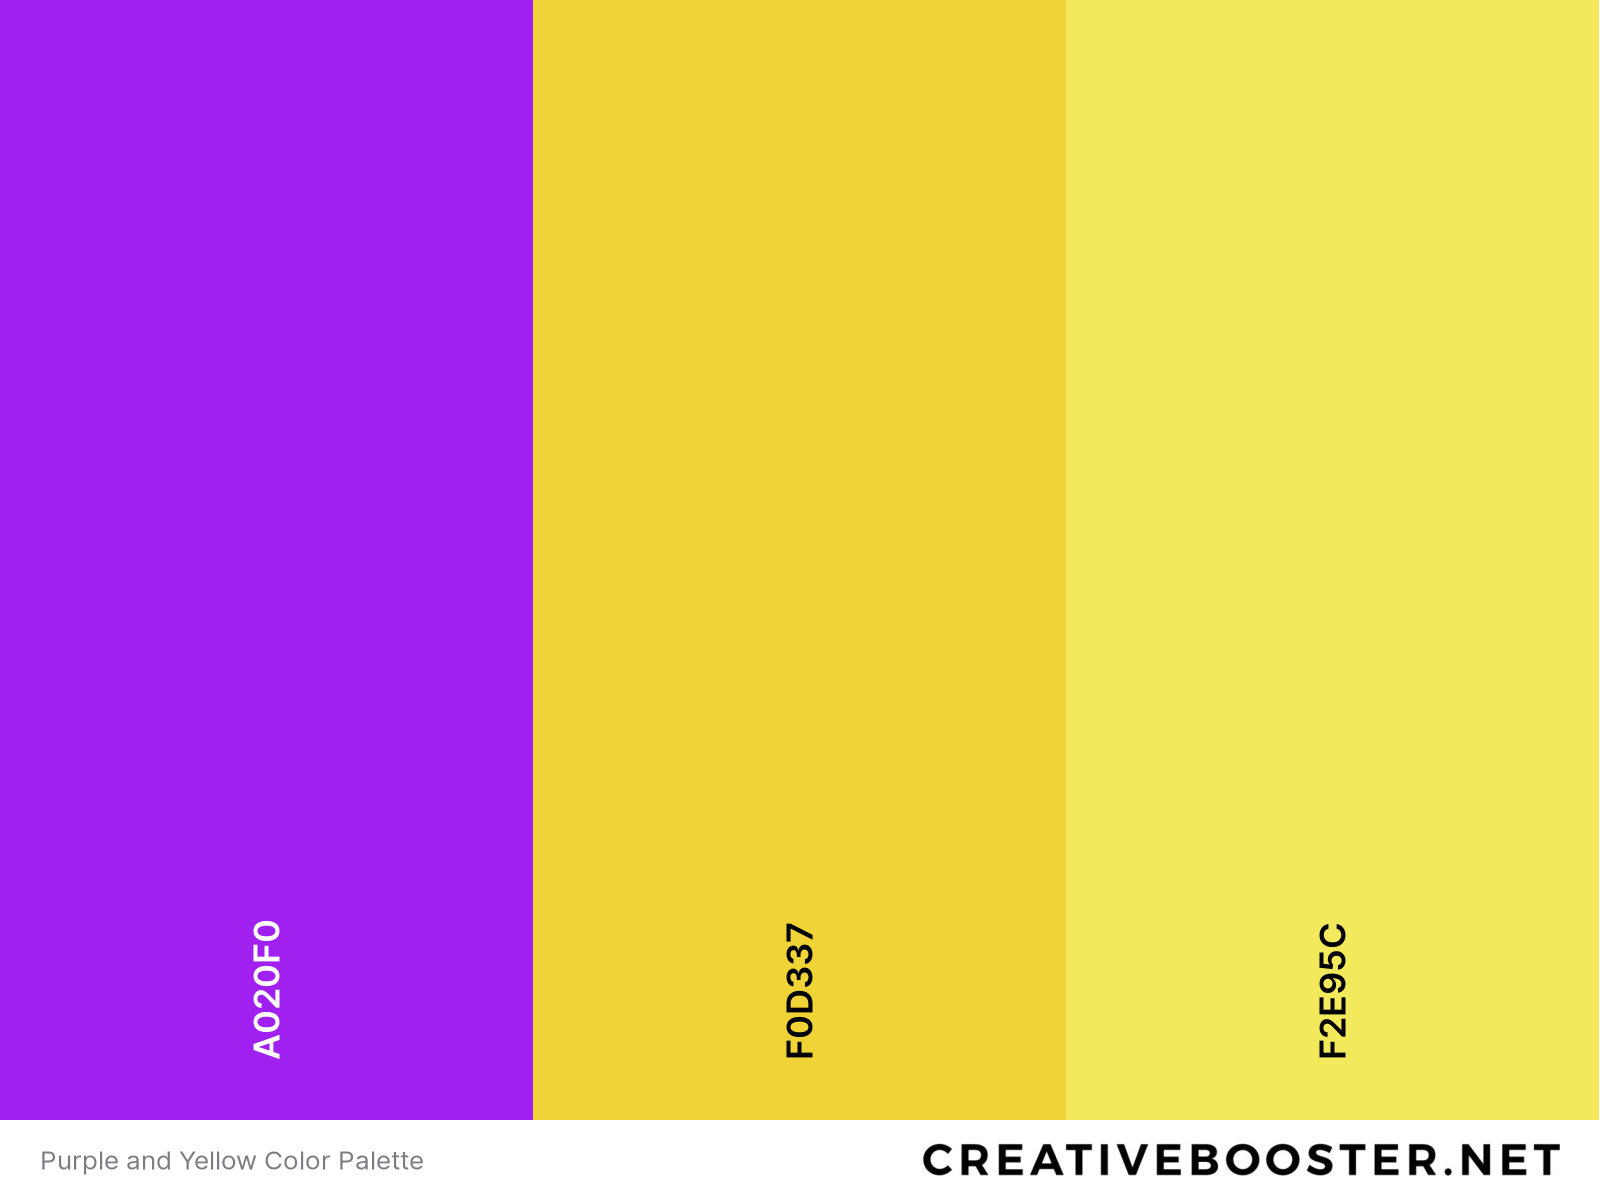 Purple and Yellow Color Palette